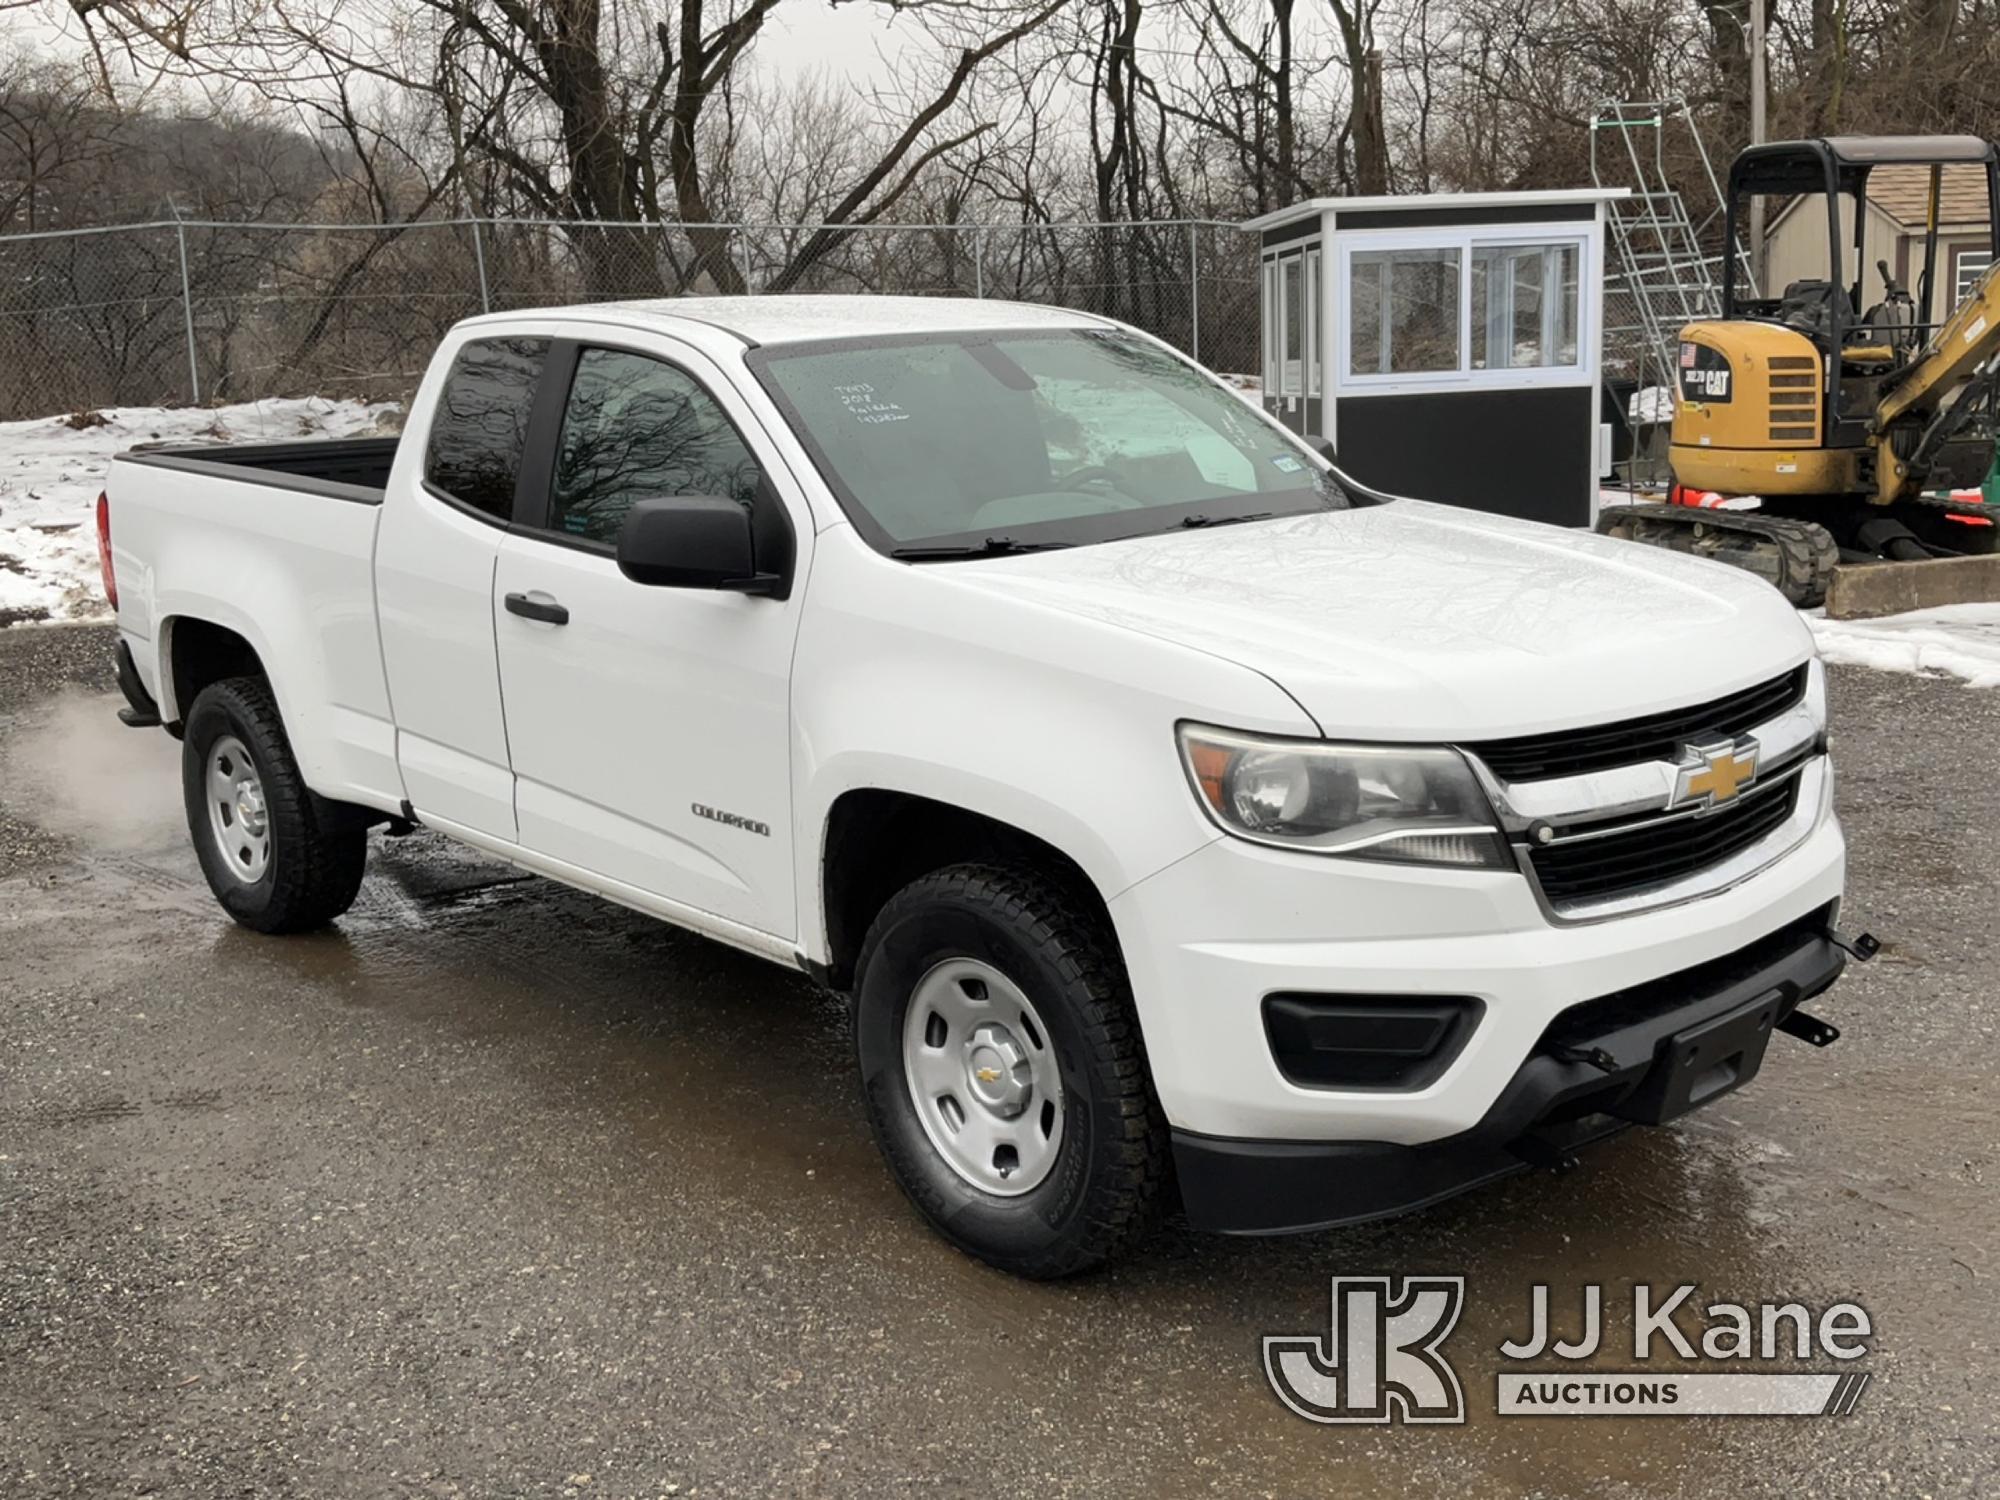 (Plymouth Meeting, PA) 2018 Chevrolet Colorado Extended-Cab Pickup Truck Runs & Moves, Body & Rust D